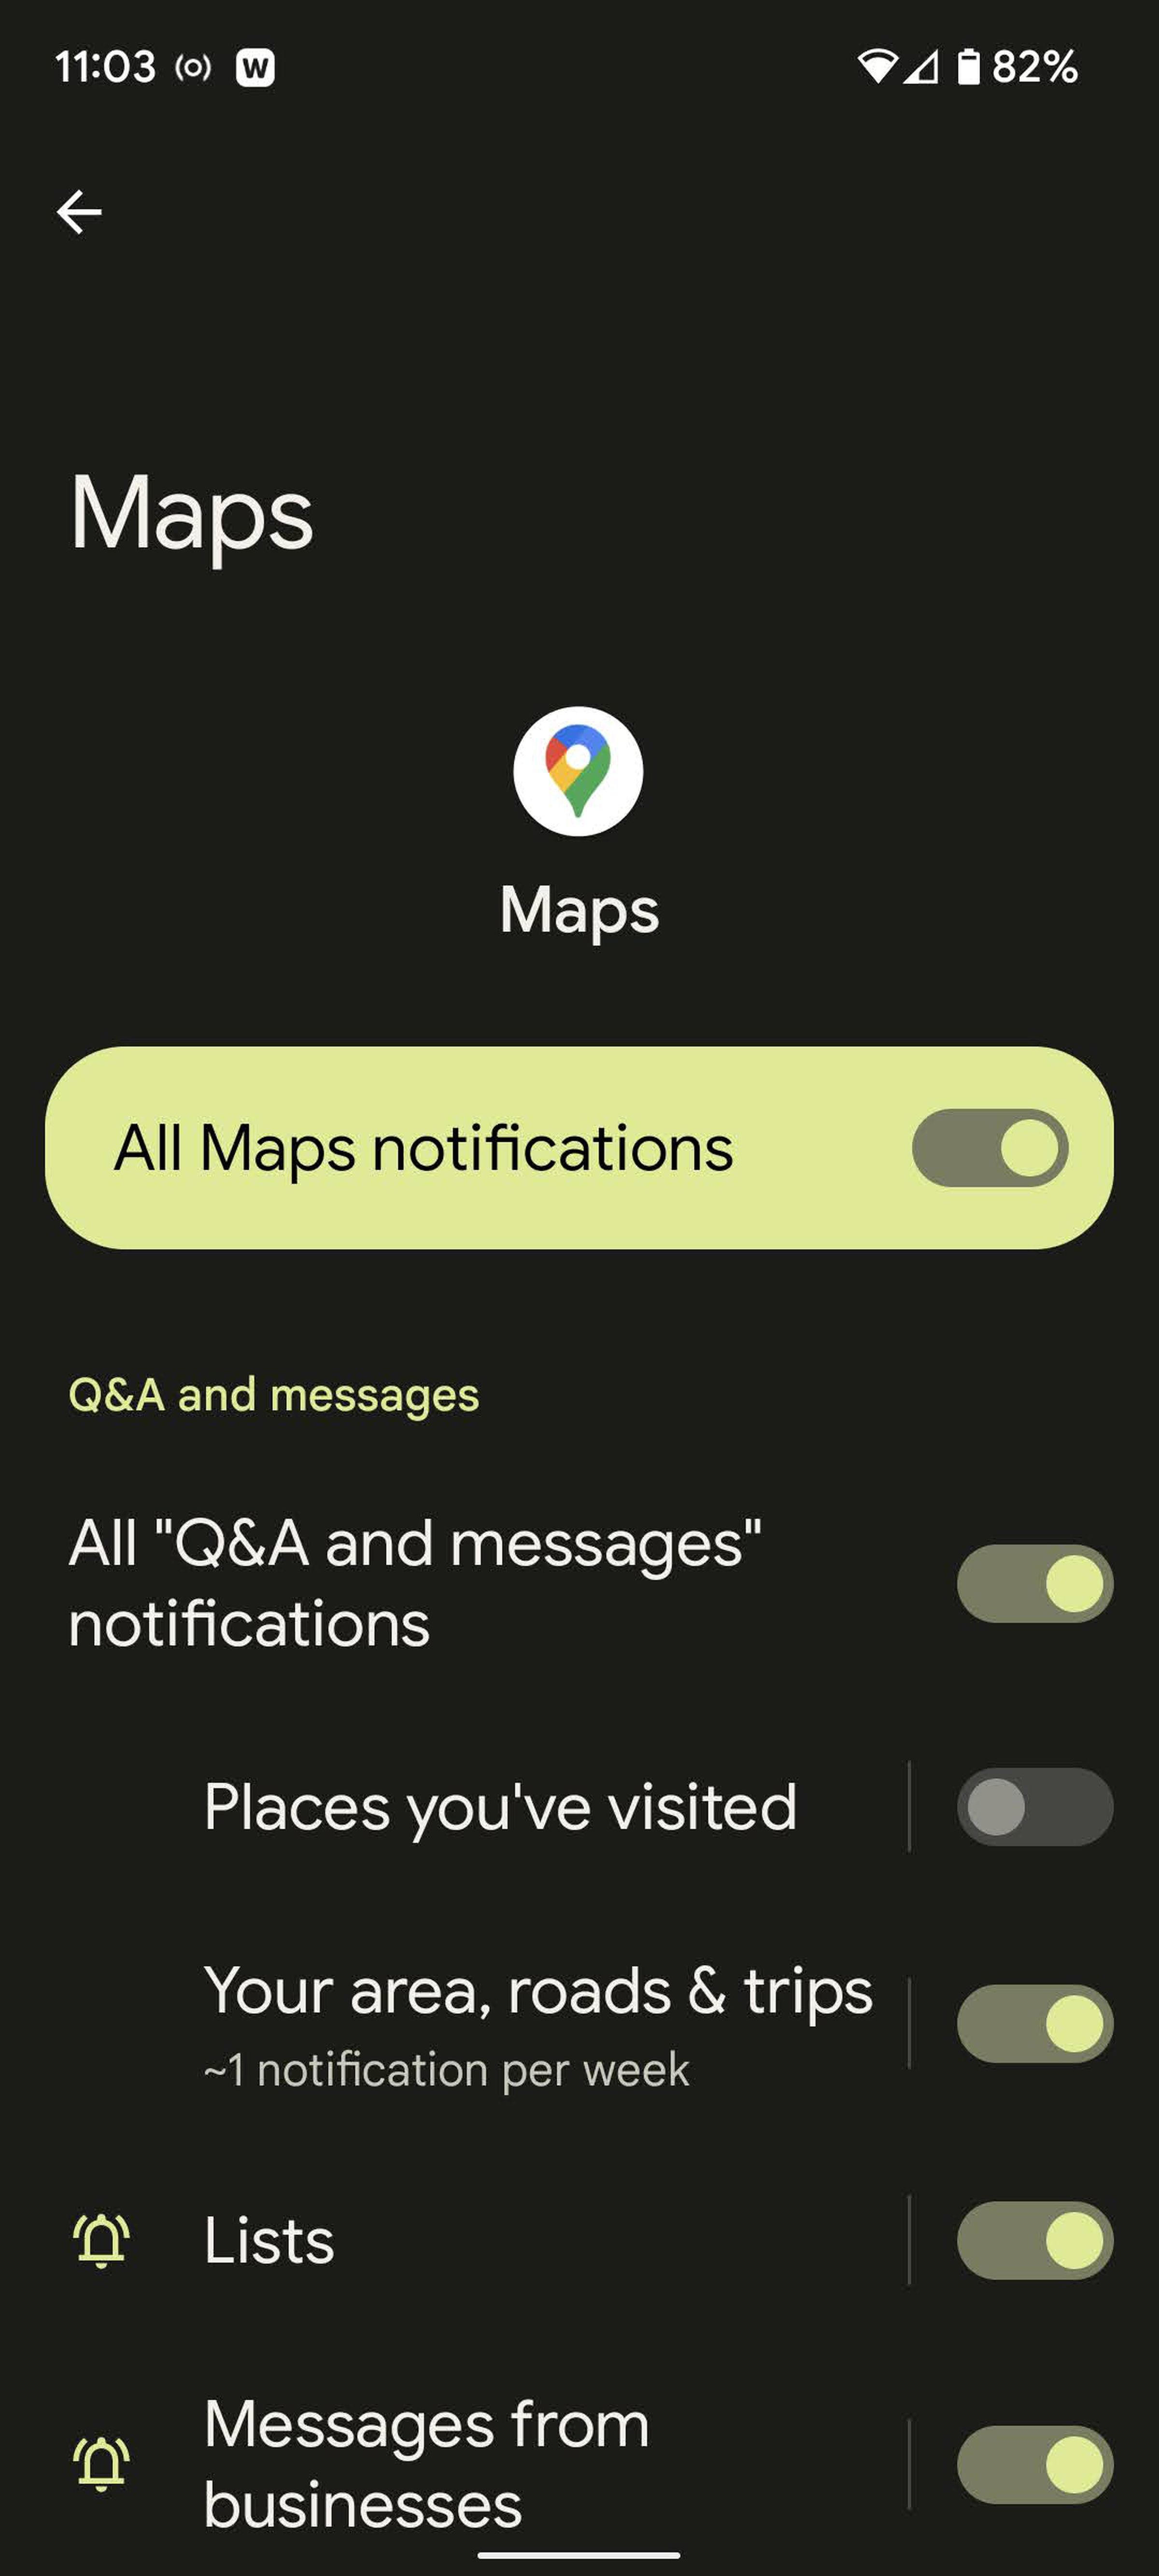 You can fine-tune the notifications for each app.